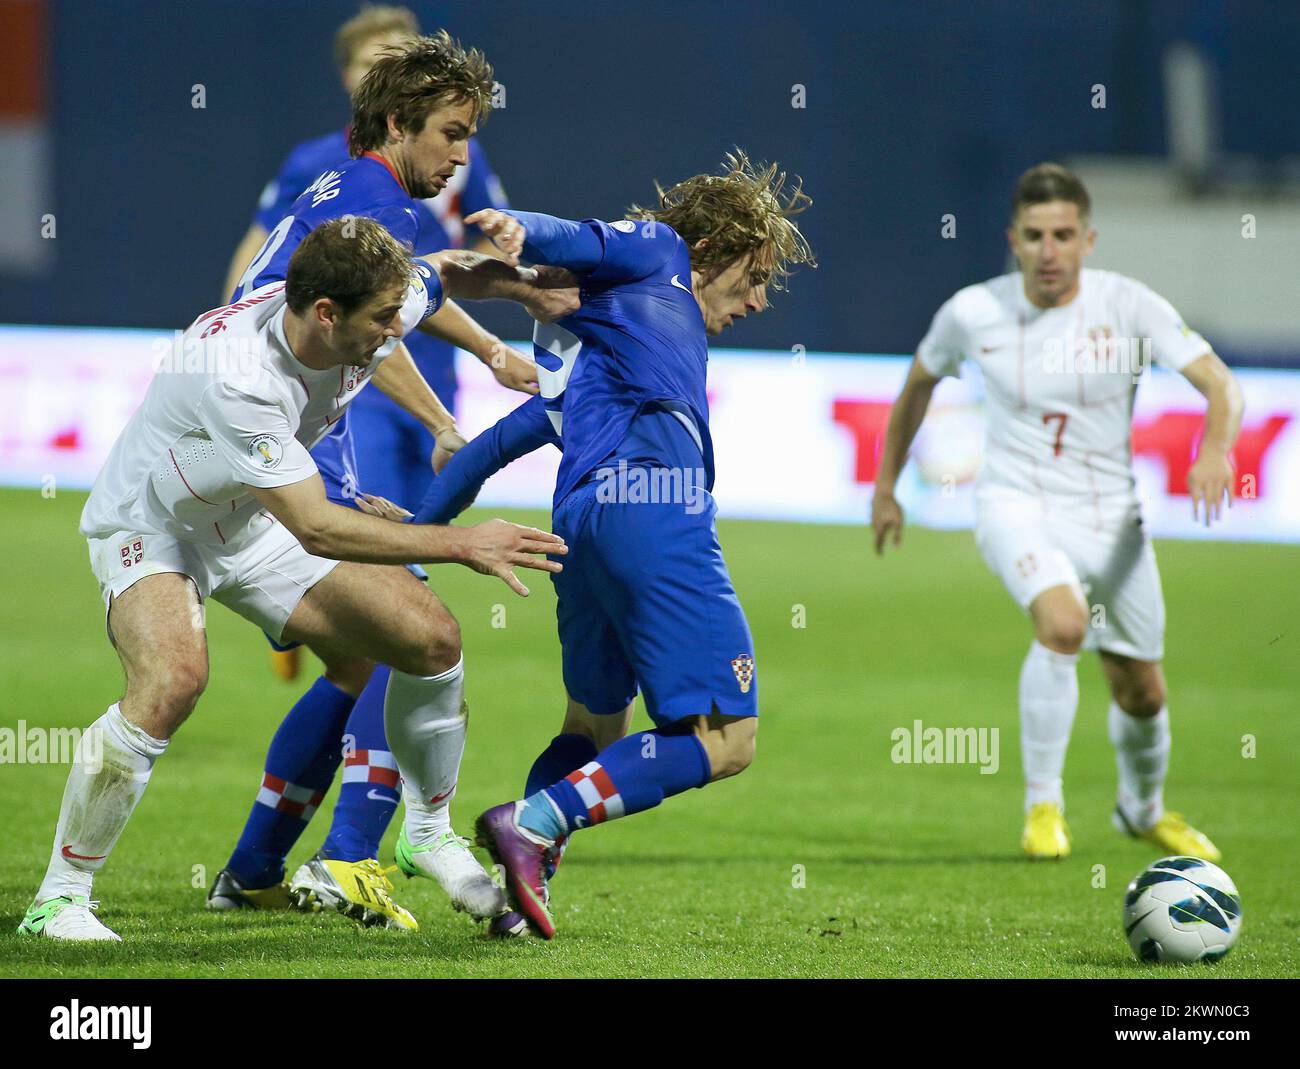 Niko Kranjcar and Luka Modric battle for the ball in the 2014 World Cup qualifier between Croatia and Serbia at Maksmir Stadium in Croatia. Stock Photo